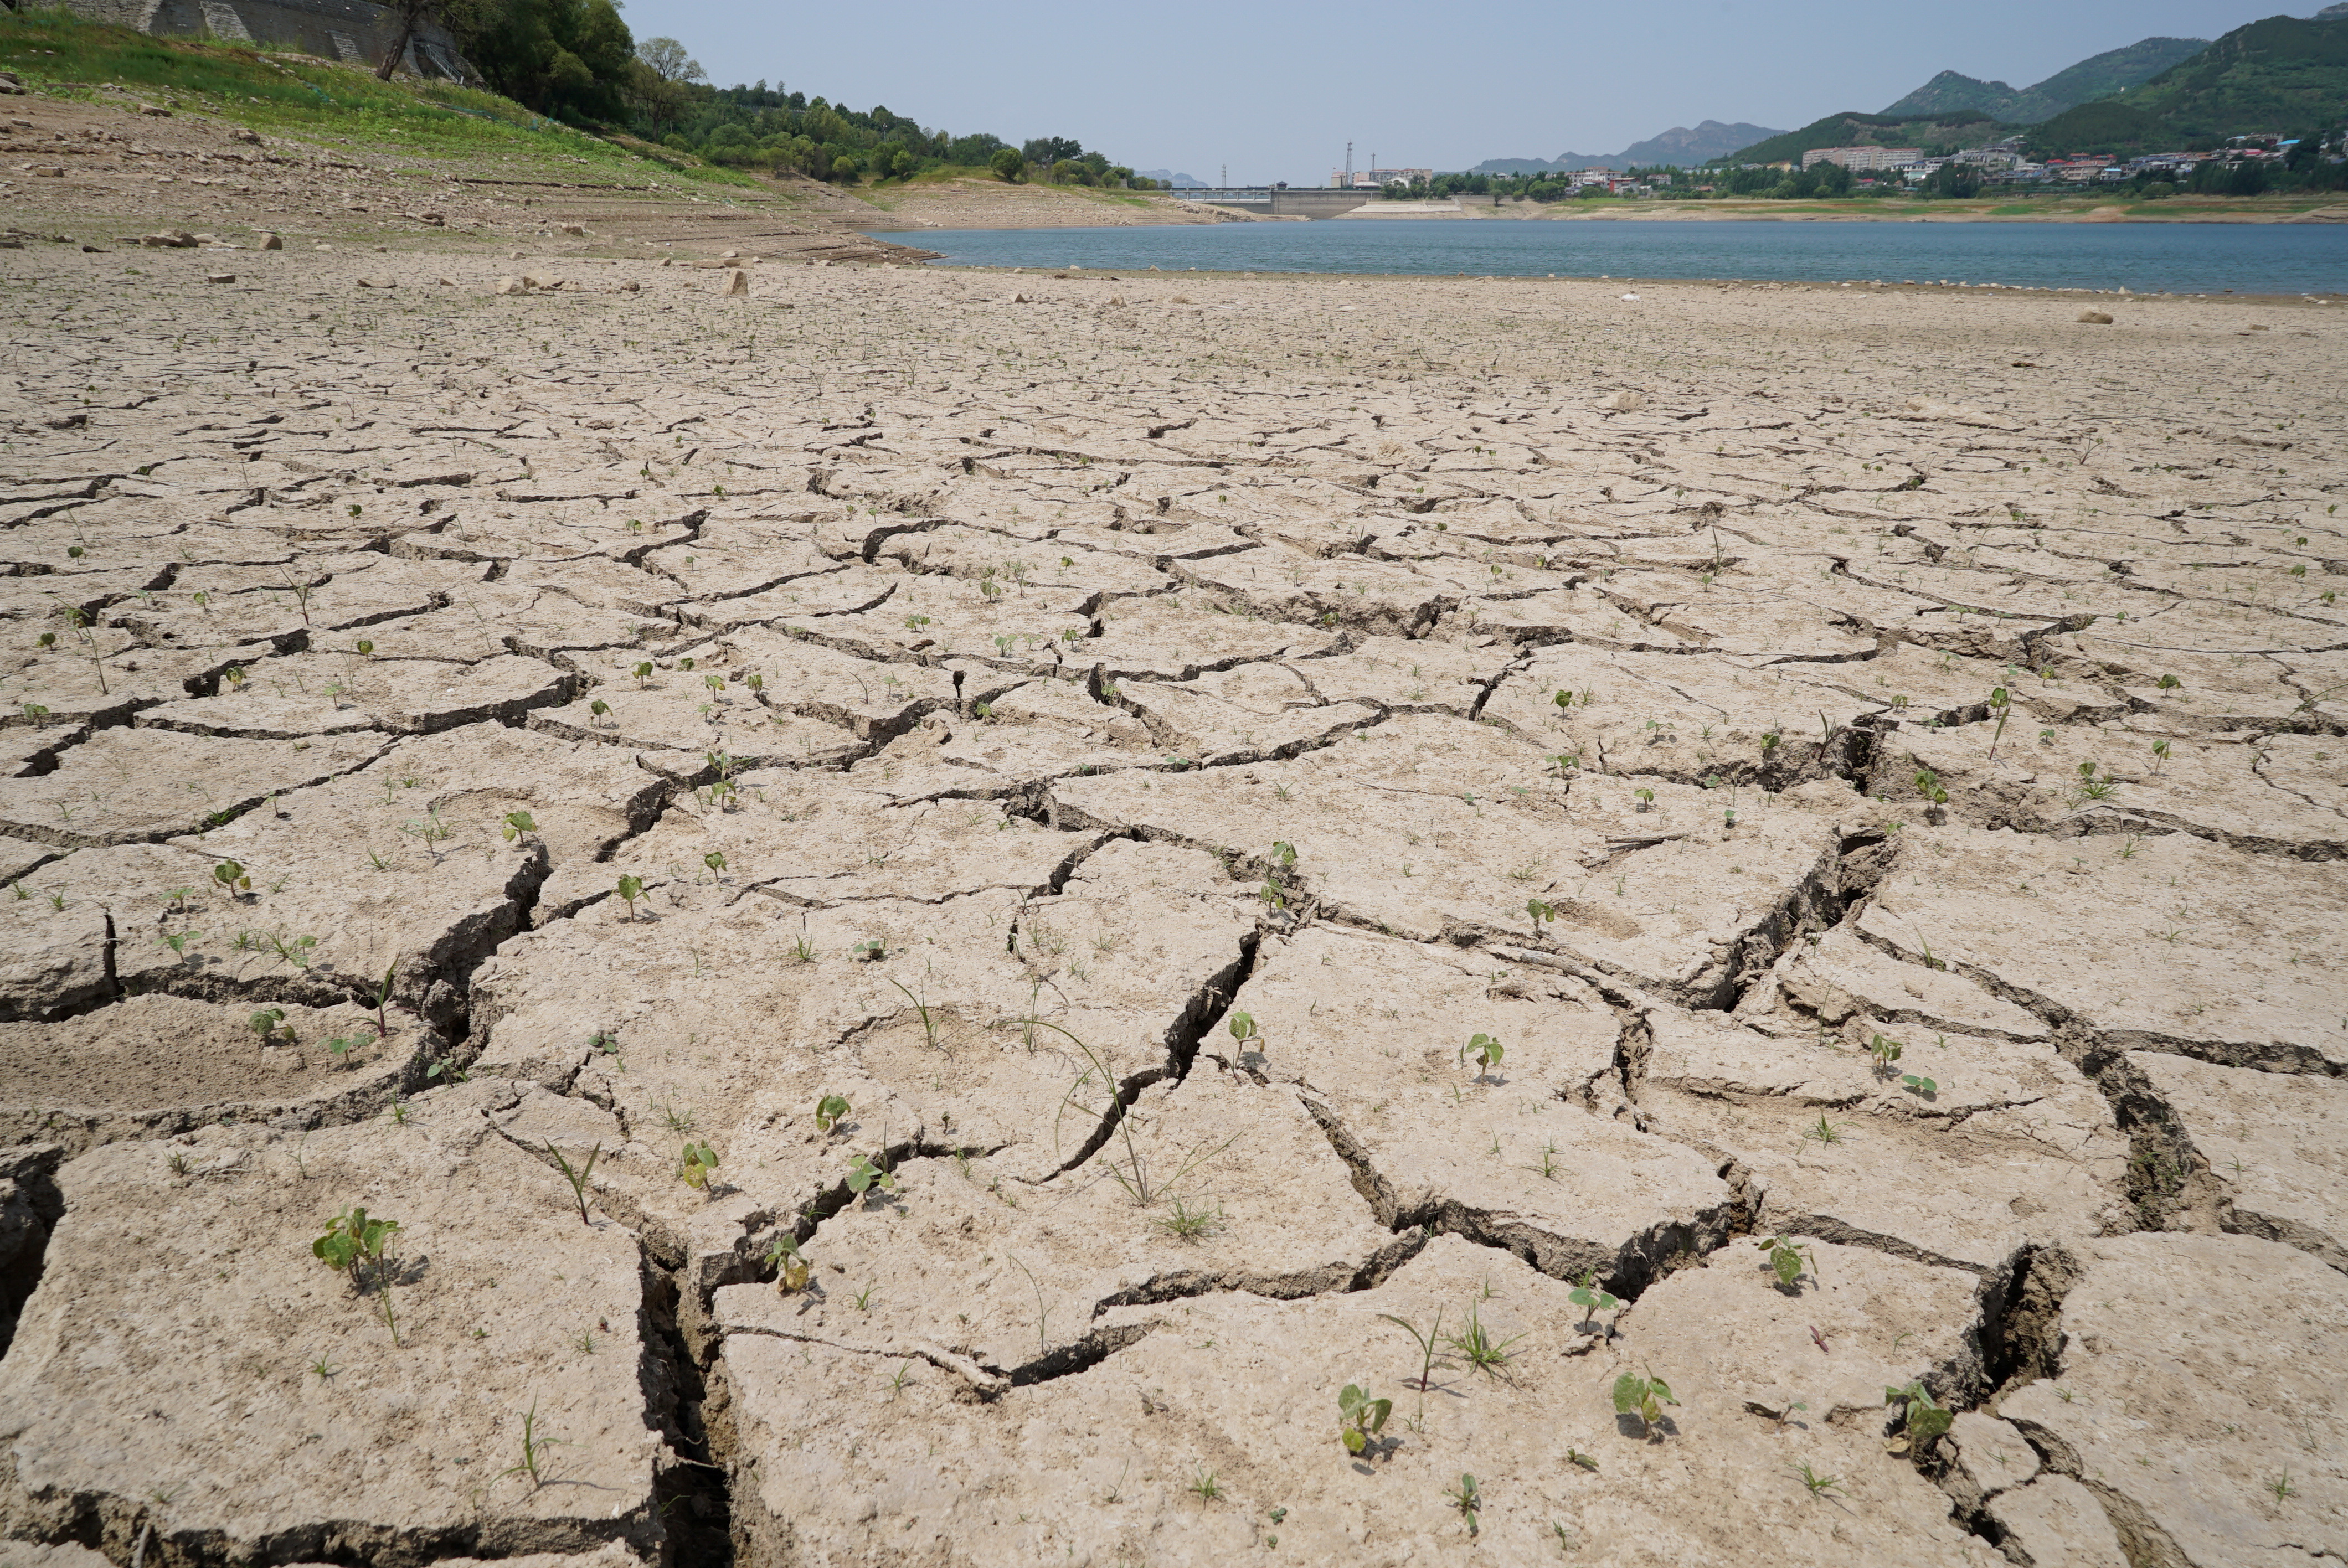 Heatwave and drought in Jinan